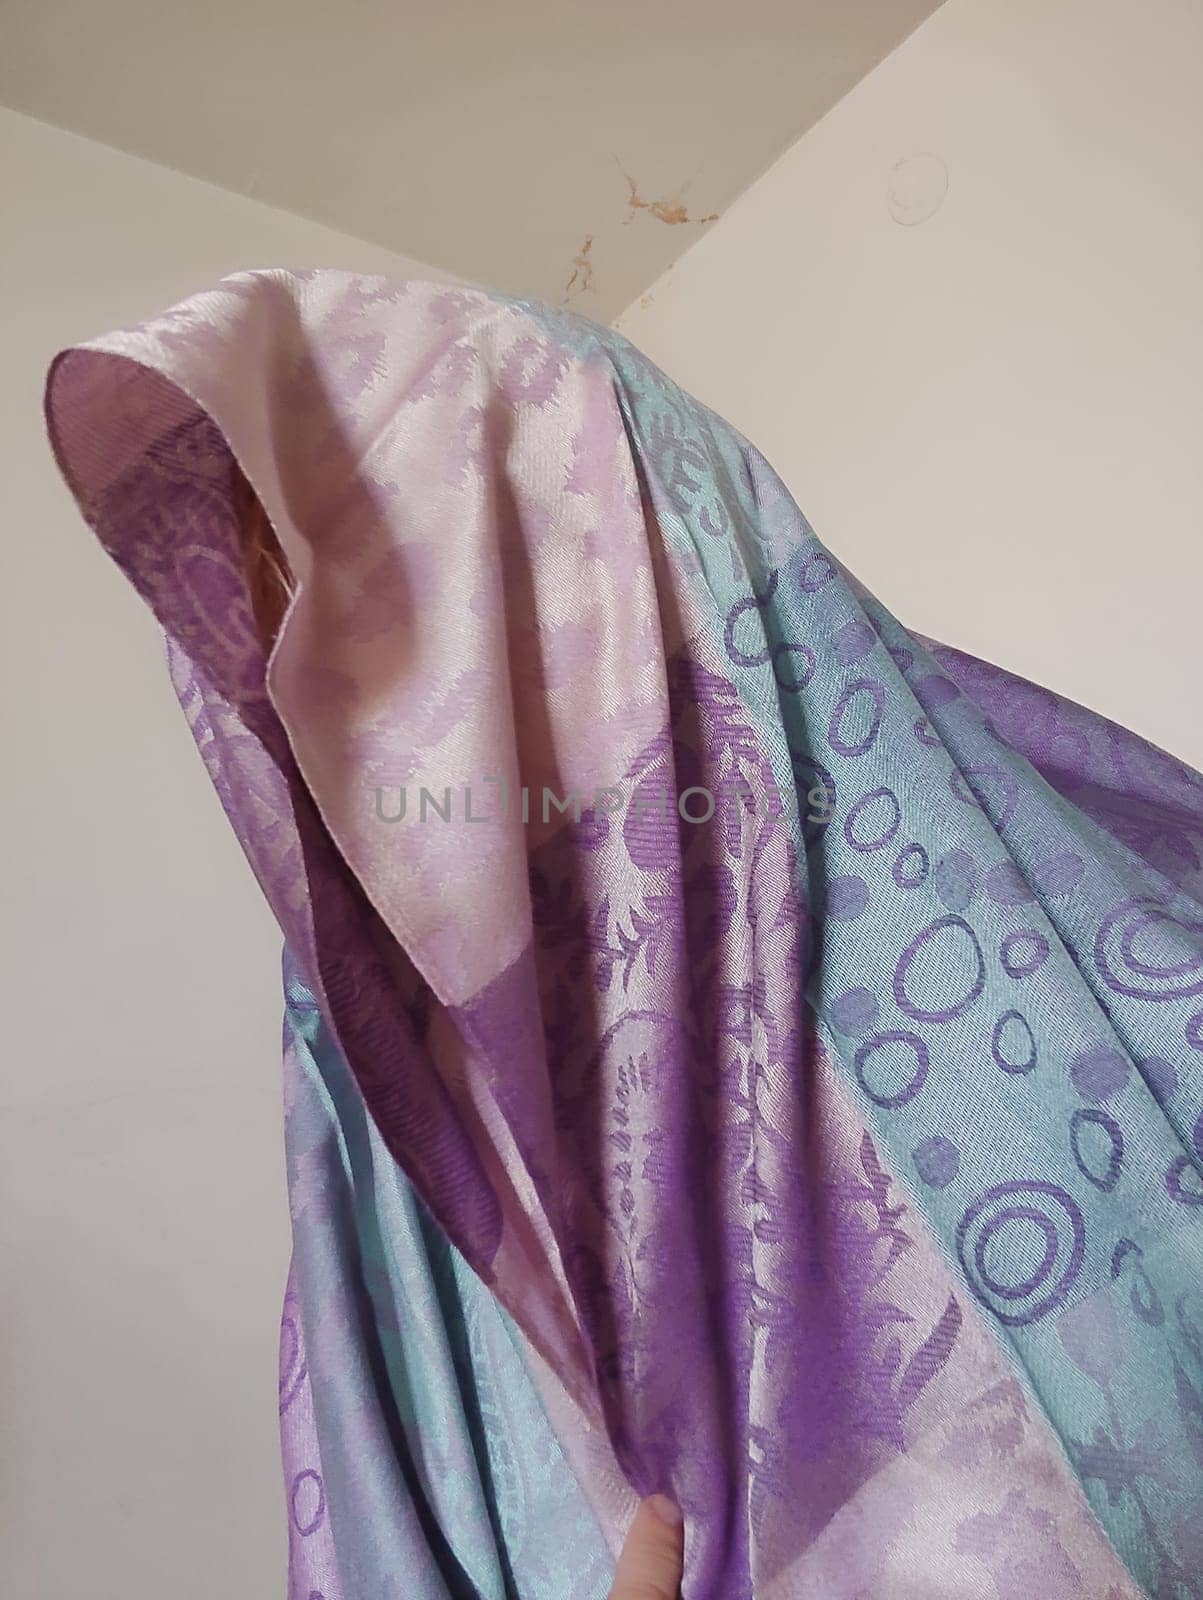 pink blue purple silk scarf on head, clothing fabric by Ply